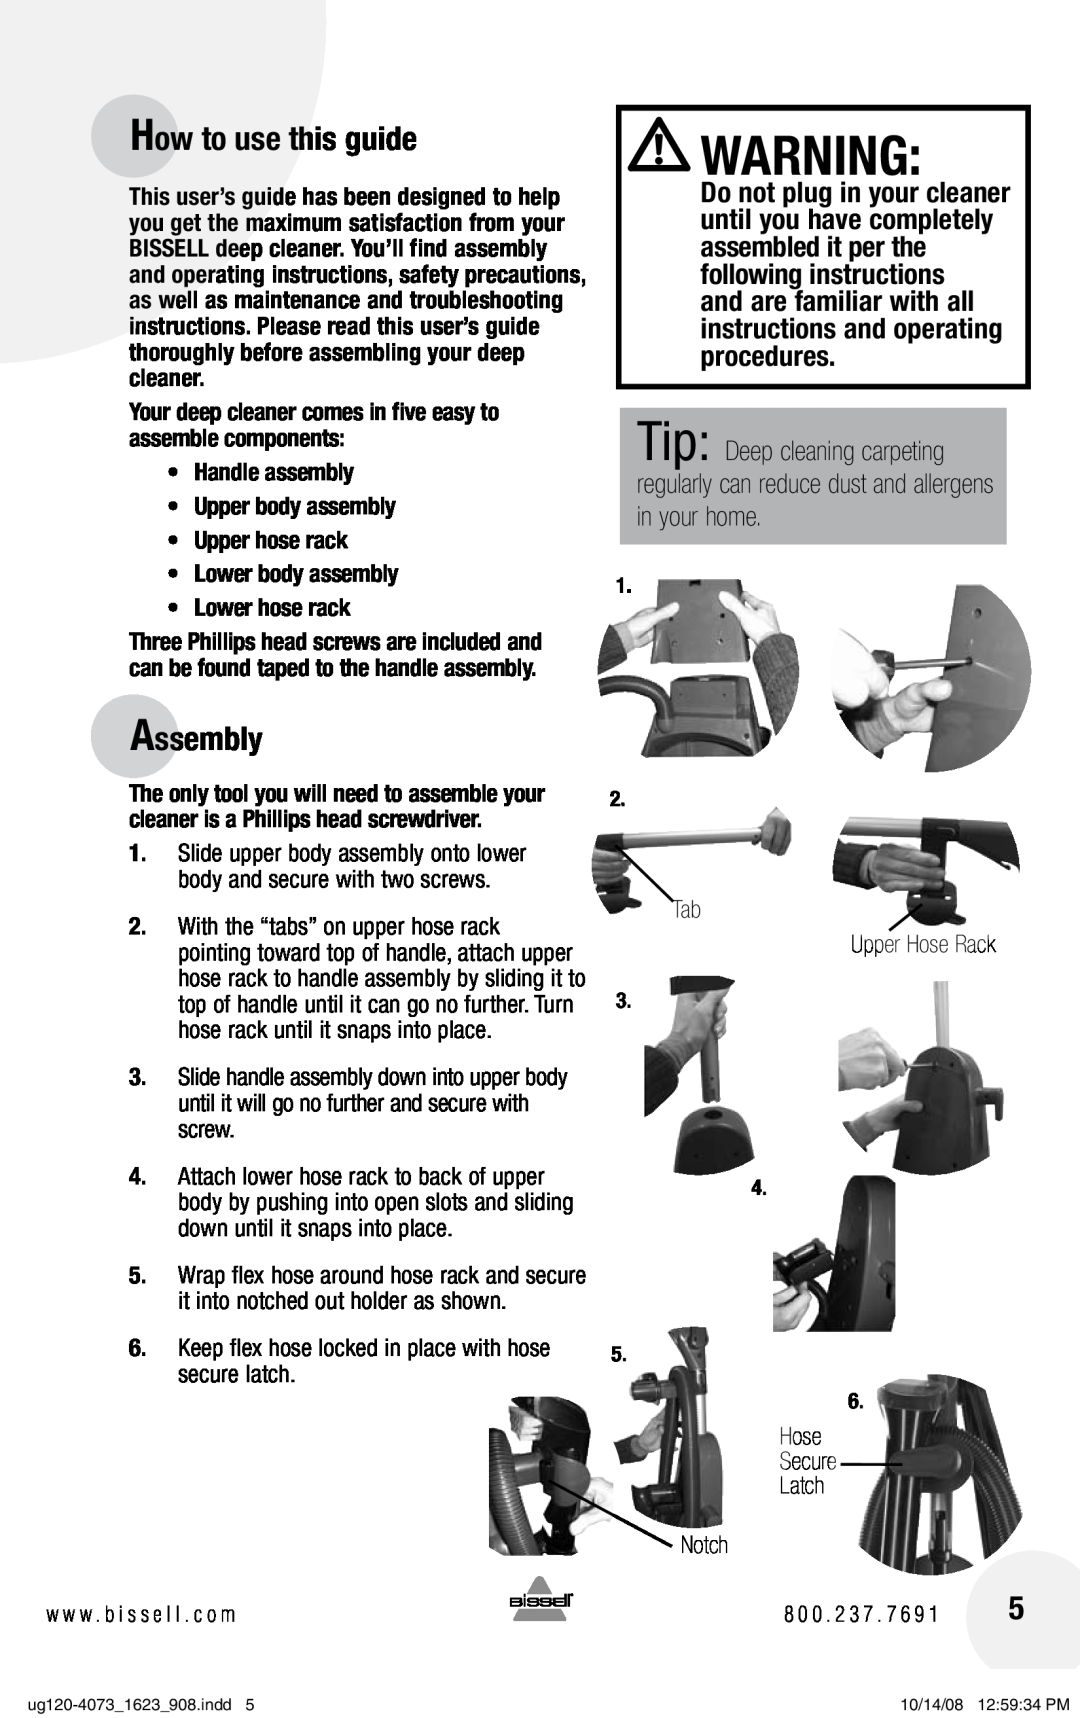 Bissell 1623 warranty How to use this guide, Assembly, Your deep cleaner comes in five easy to assemble components 